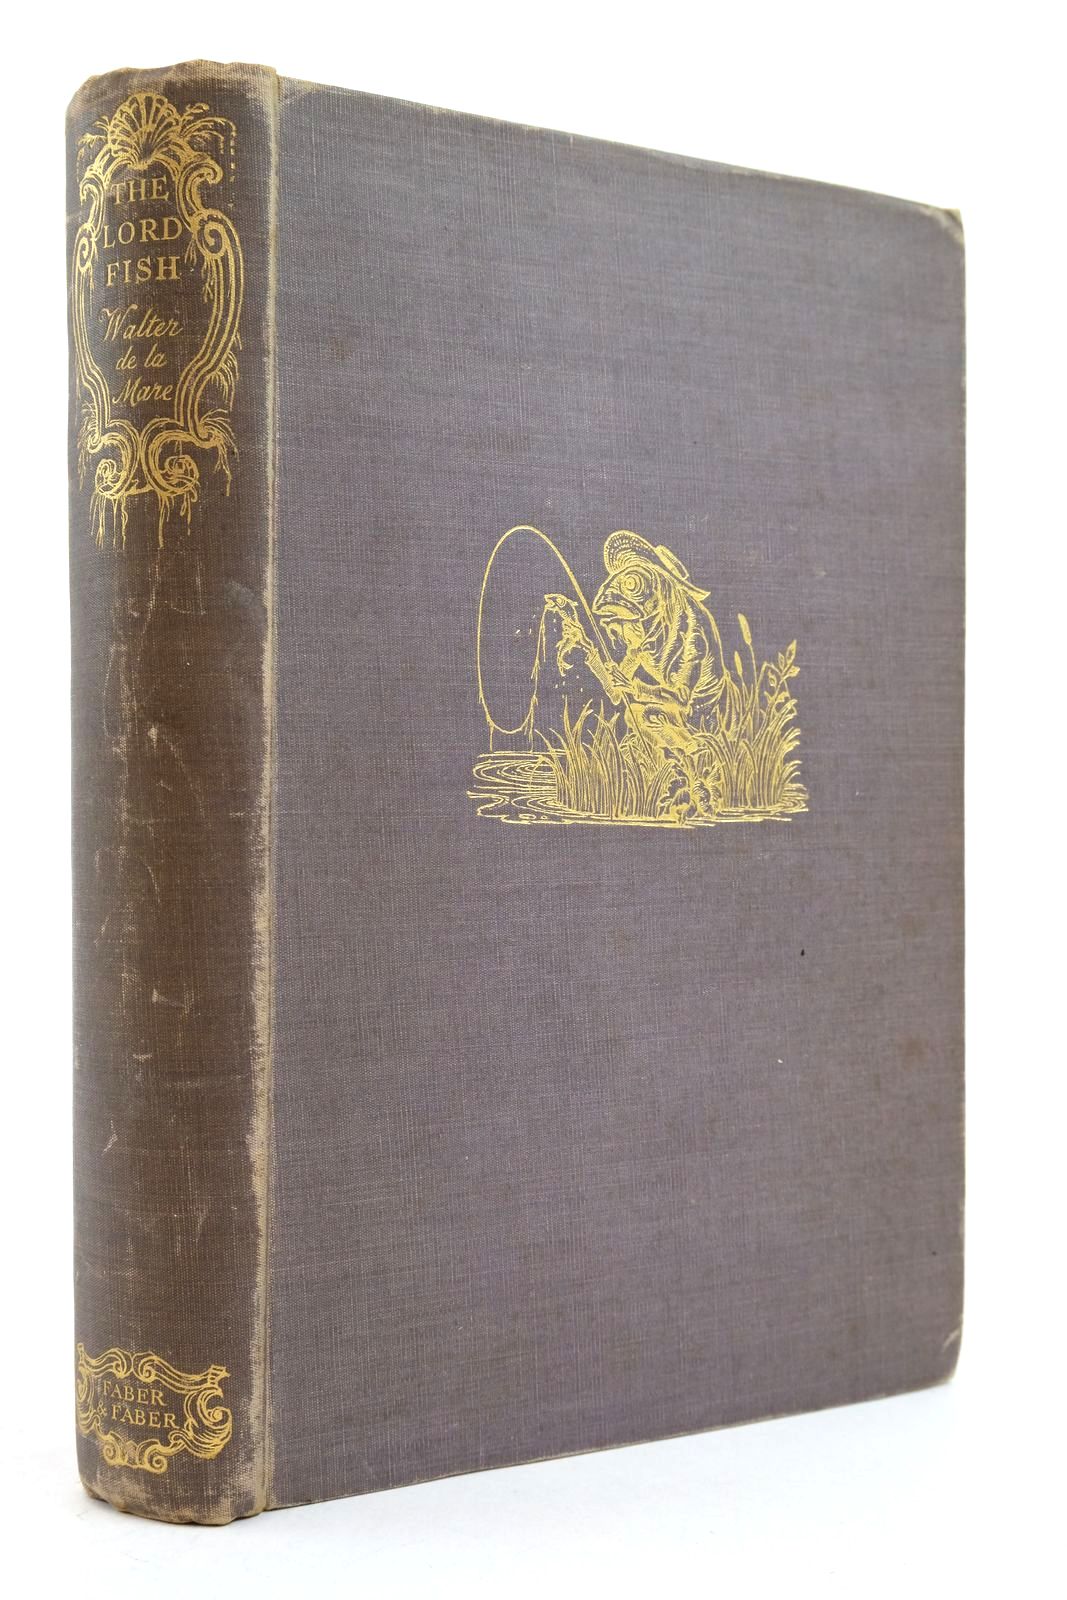 Photo of THE LORD FISH written by De La Mare, Walter illustrated by Whistler, Rex published by Faber &amp; Faber (STOCK CODE: 2140153)  for sale by Stella & Rose's Books